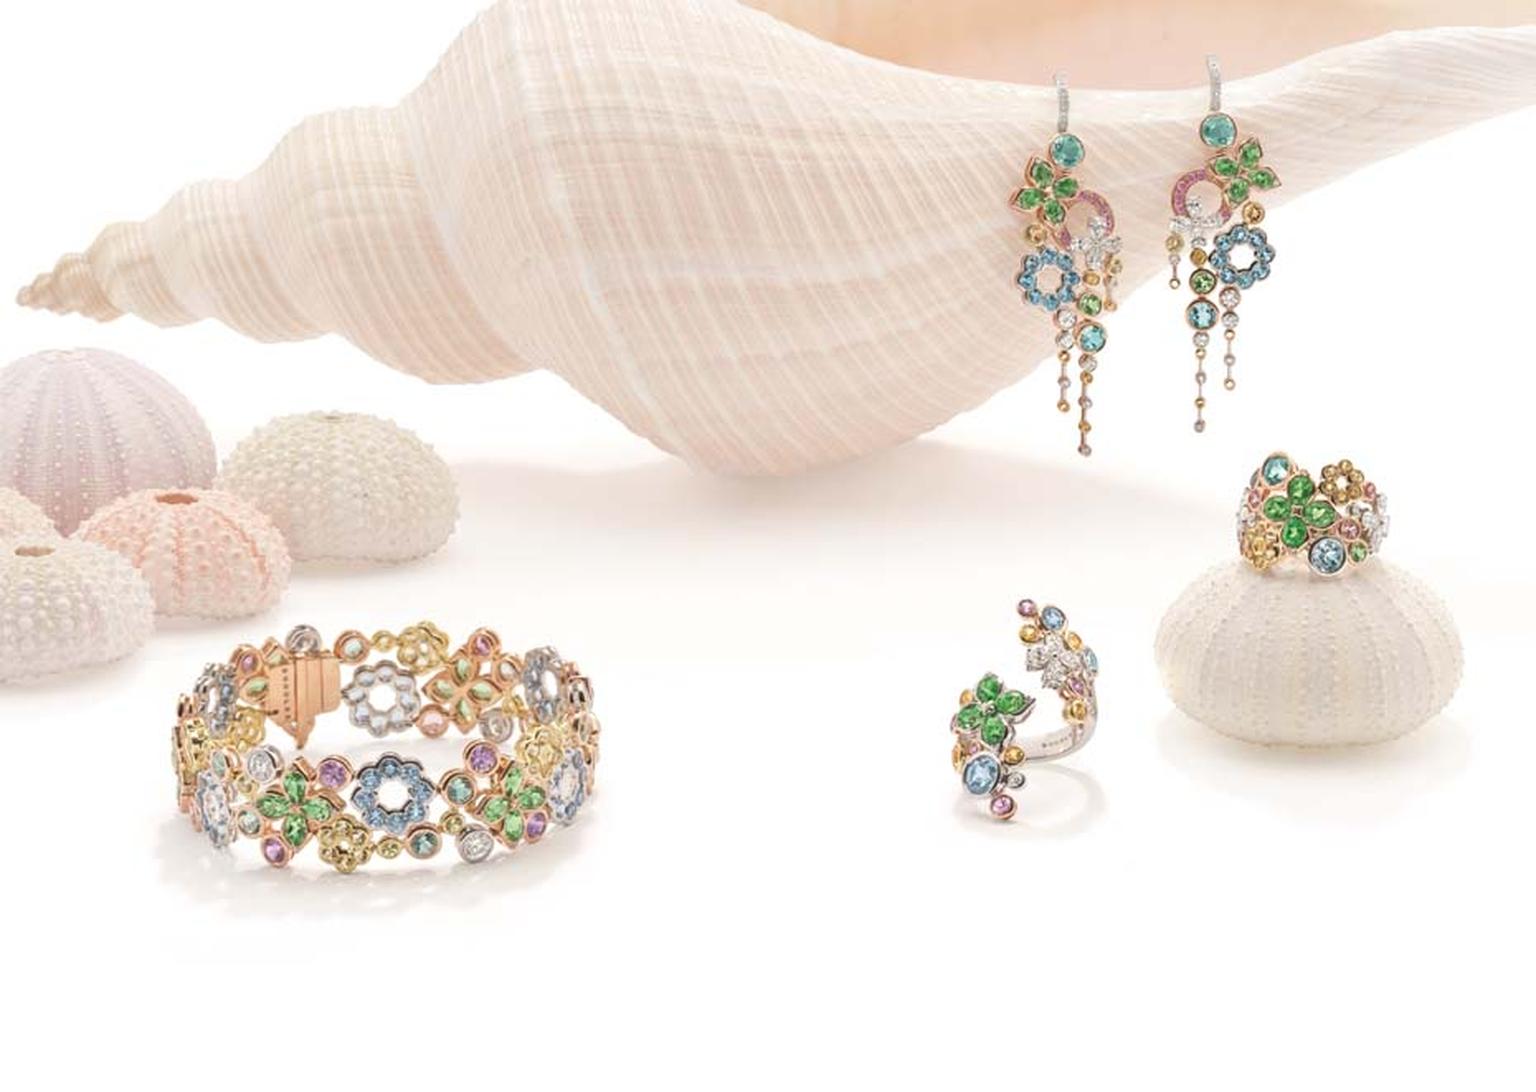 Boodles Pastel Reef suite with aquamarines, tsavorites, pink and yellow sapphires, and green and yellow beryls, from the new 'Ocean of Dreams' collection.